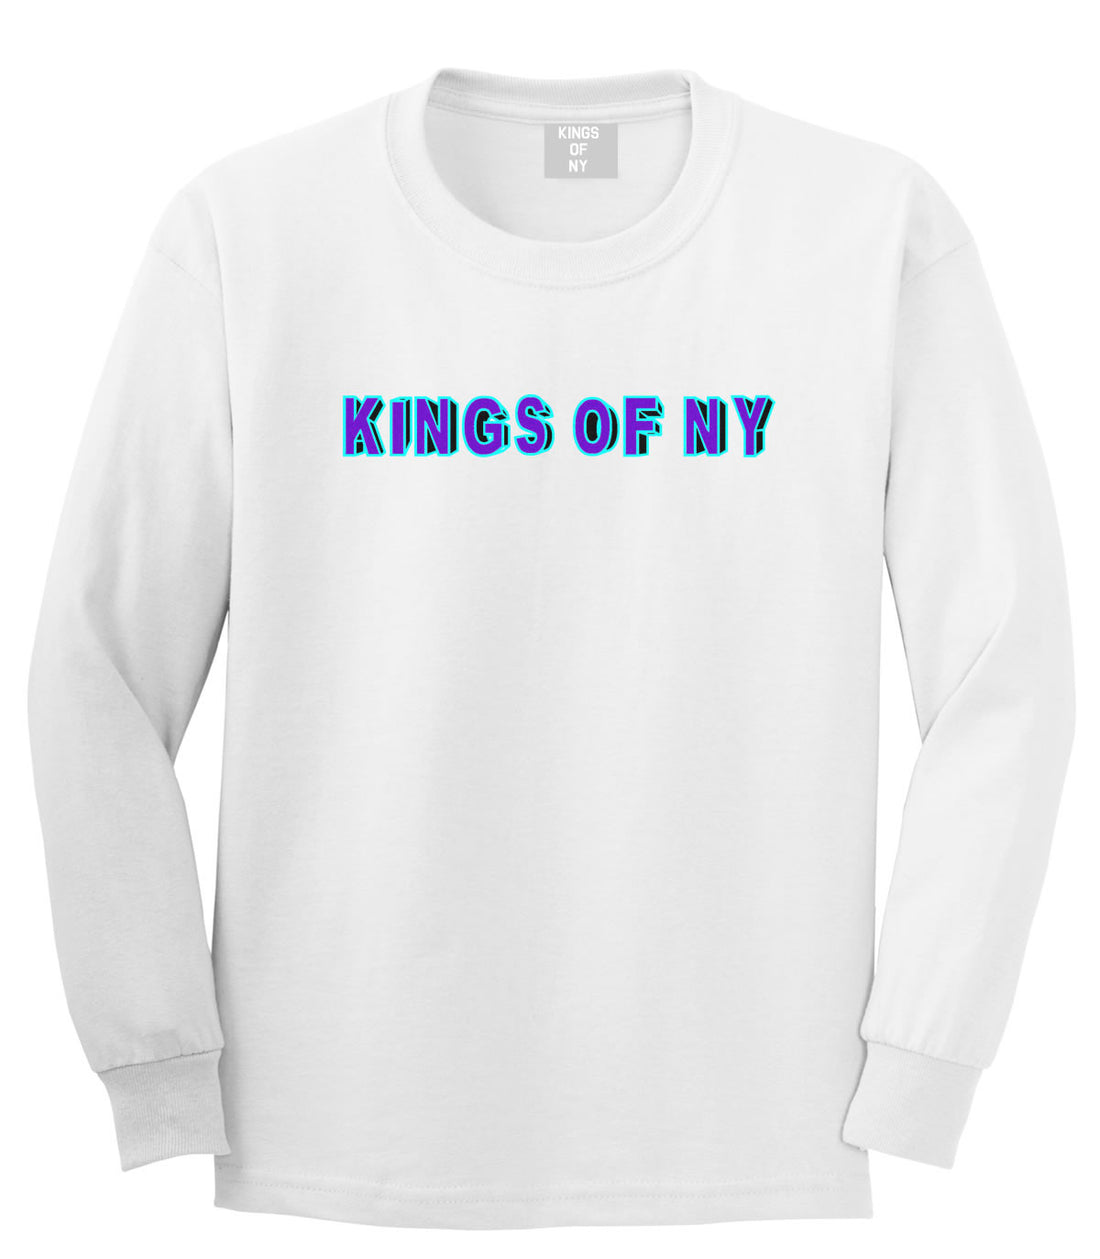 Bright Block Letters Boys Kids Long Sleeve T-Shirt in White by Kings Of NY